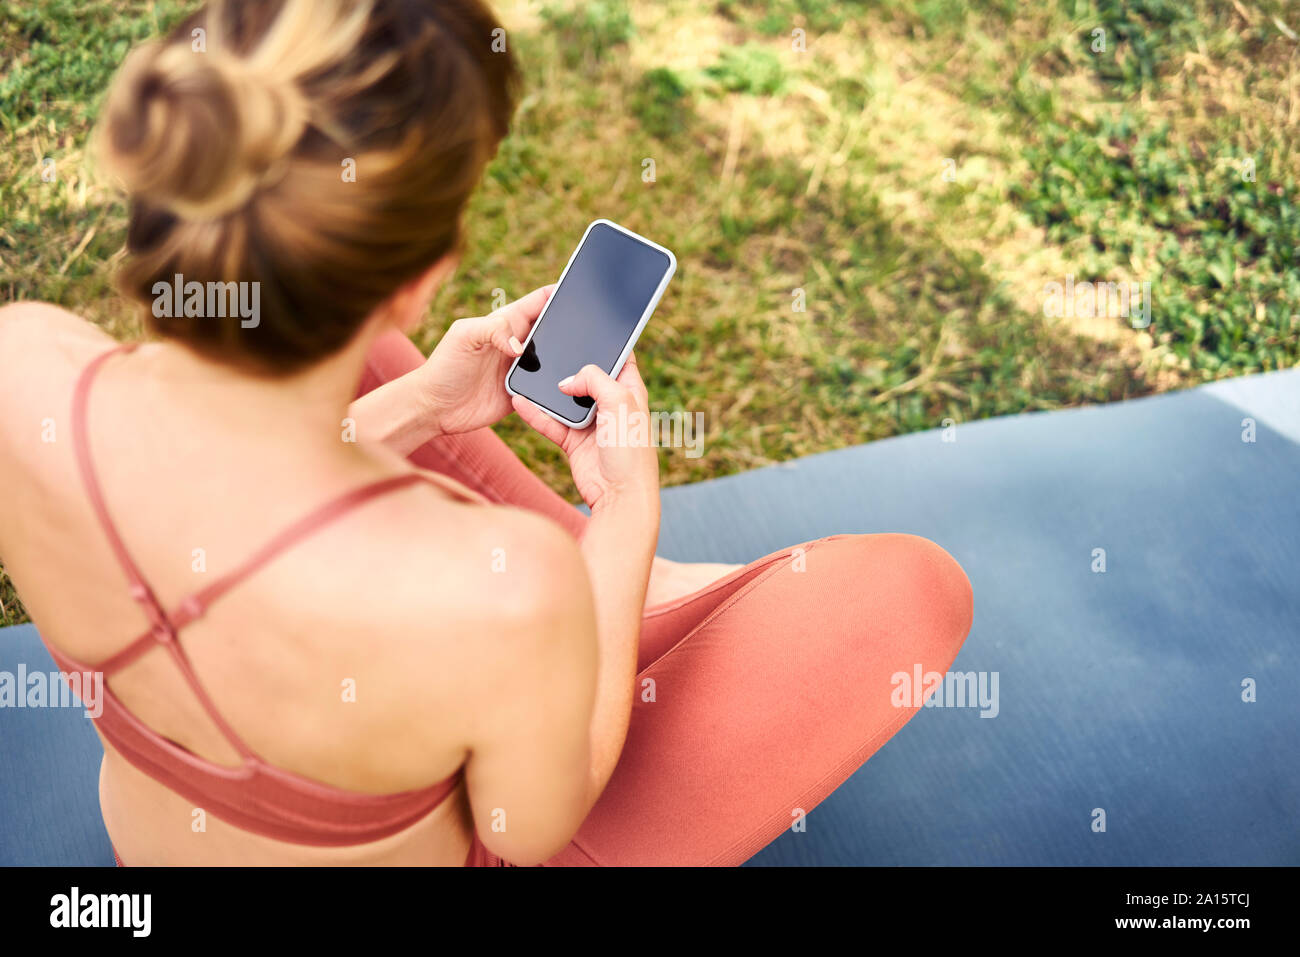 Woman using smartphone while taking a break from practicing yoga outdoors Stock Photo